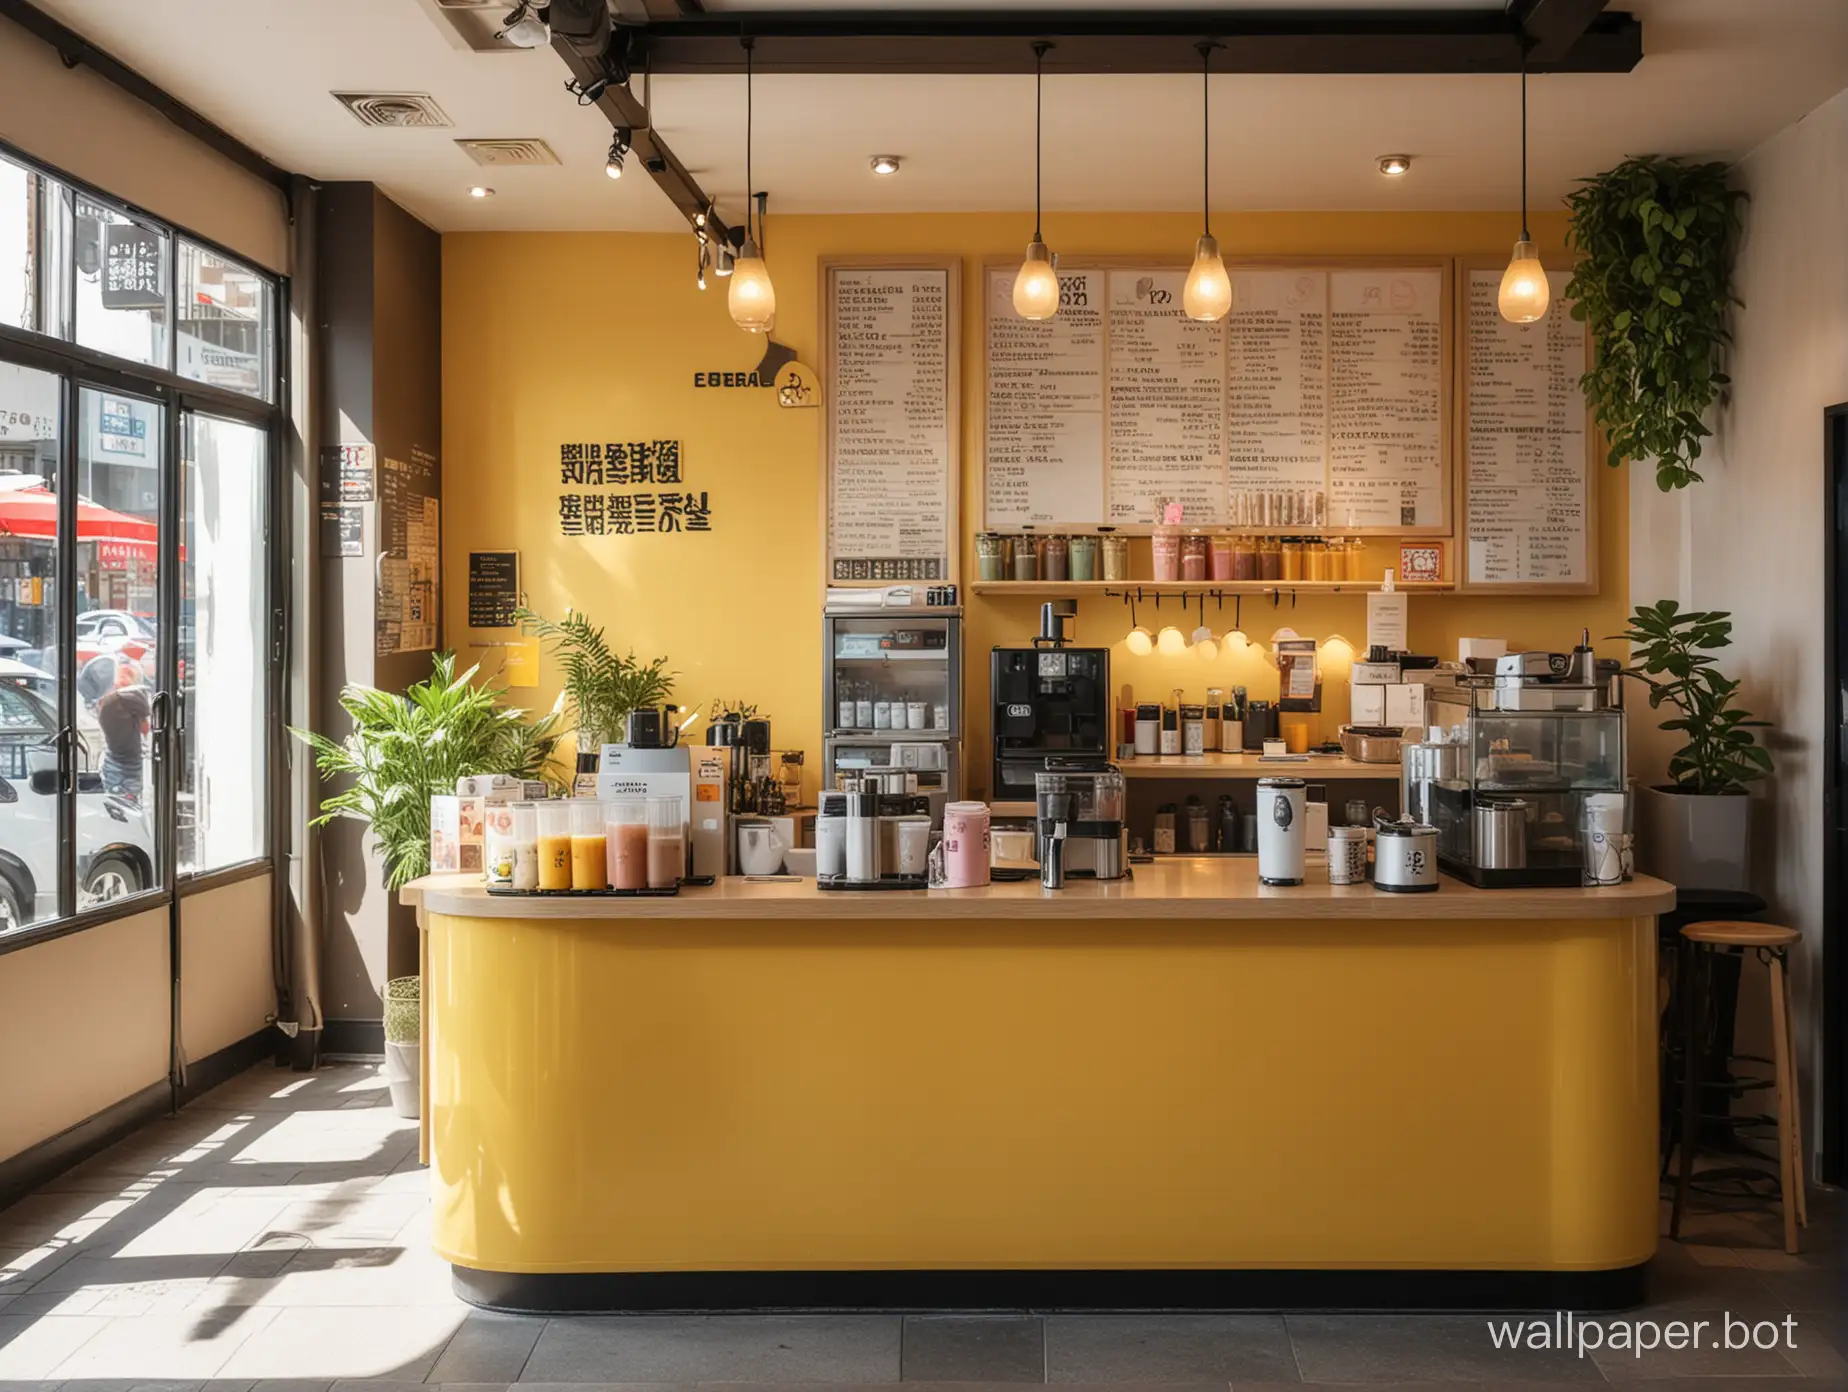 A sunny bubble tea shop counter, tidy, with the perspective kept directly facing the front